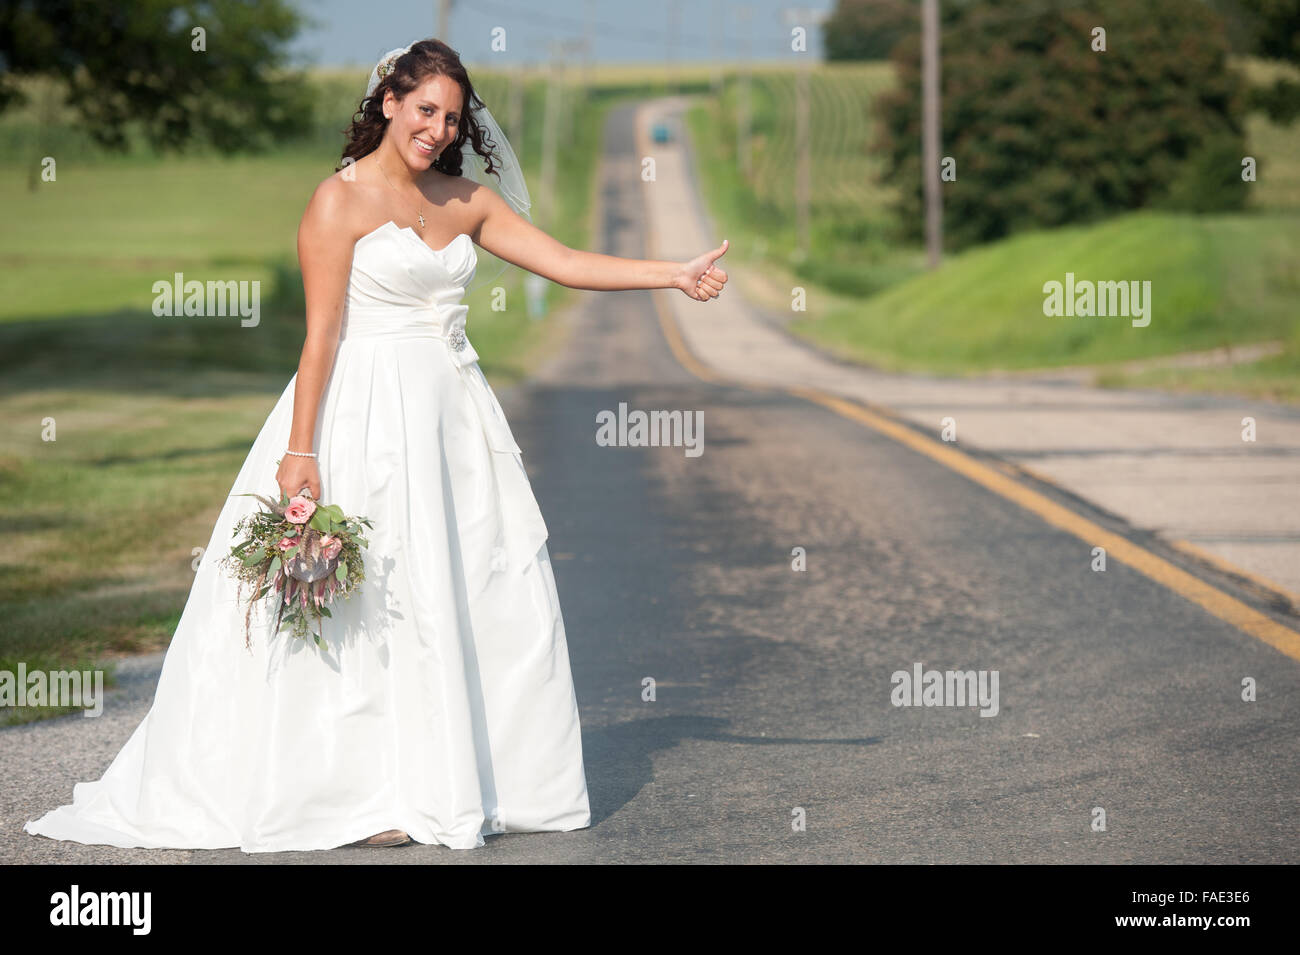 Bride hitching a ride in her wedding dress Stock Photo